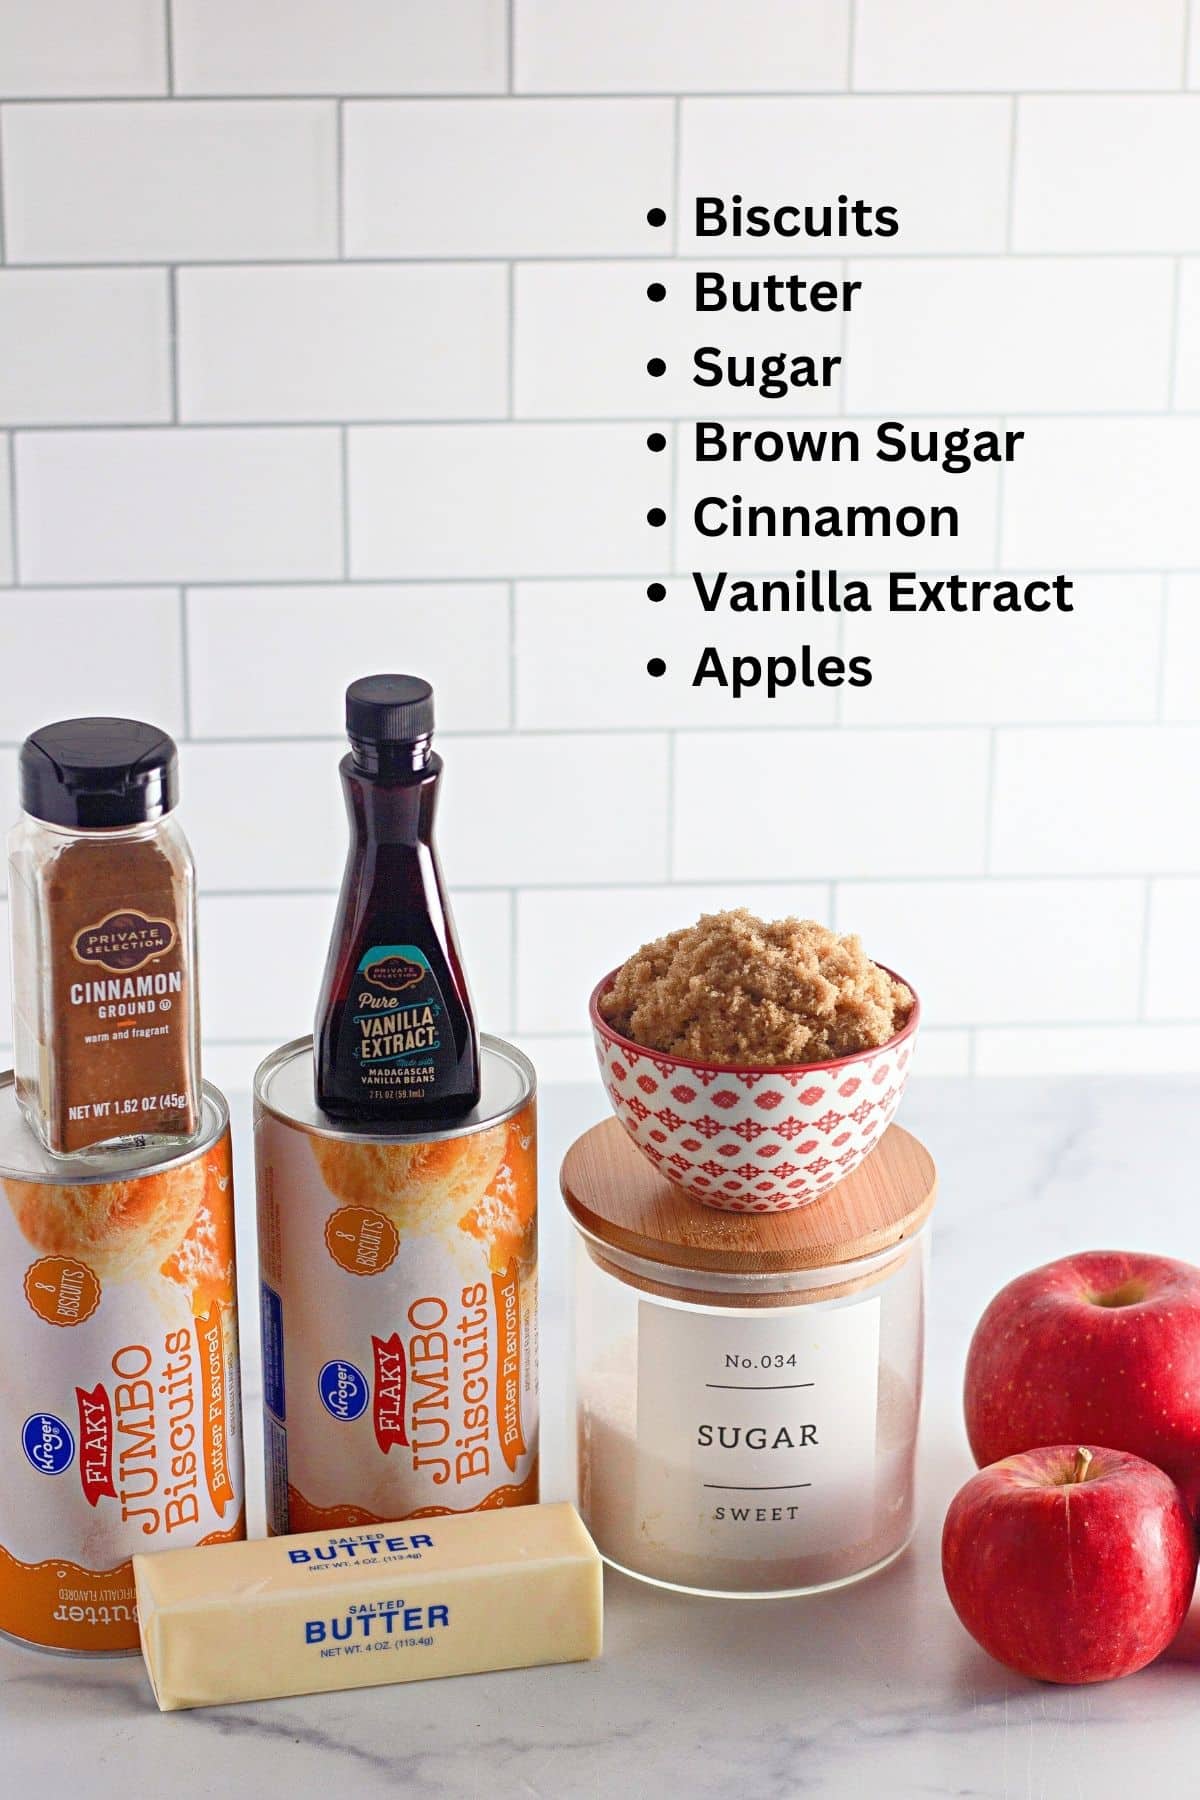 Ingredients for baking displayed on a counter, including biscuits, butter, brown sugar, cinnamon, vanilla extract, sugar, and apples.